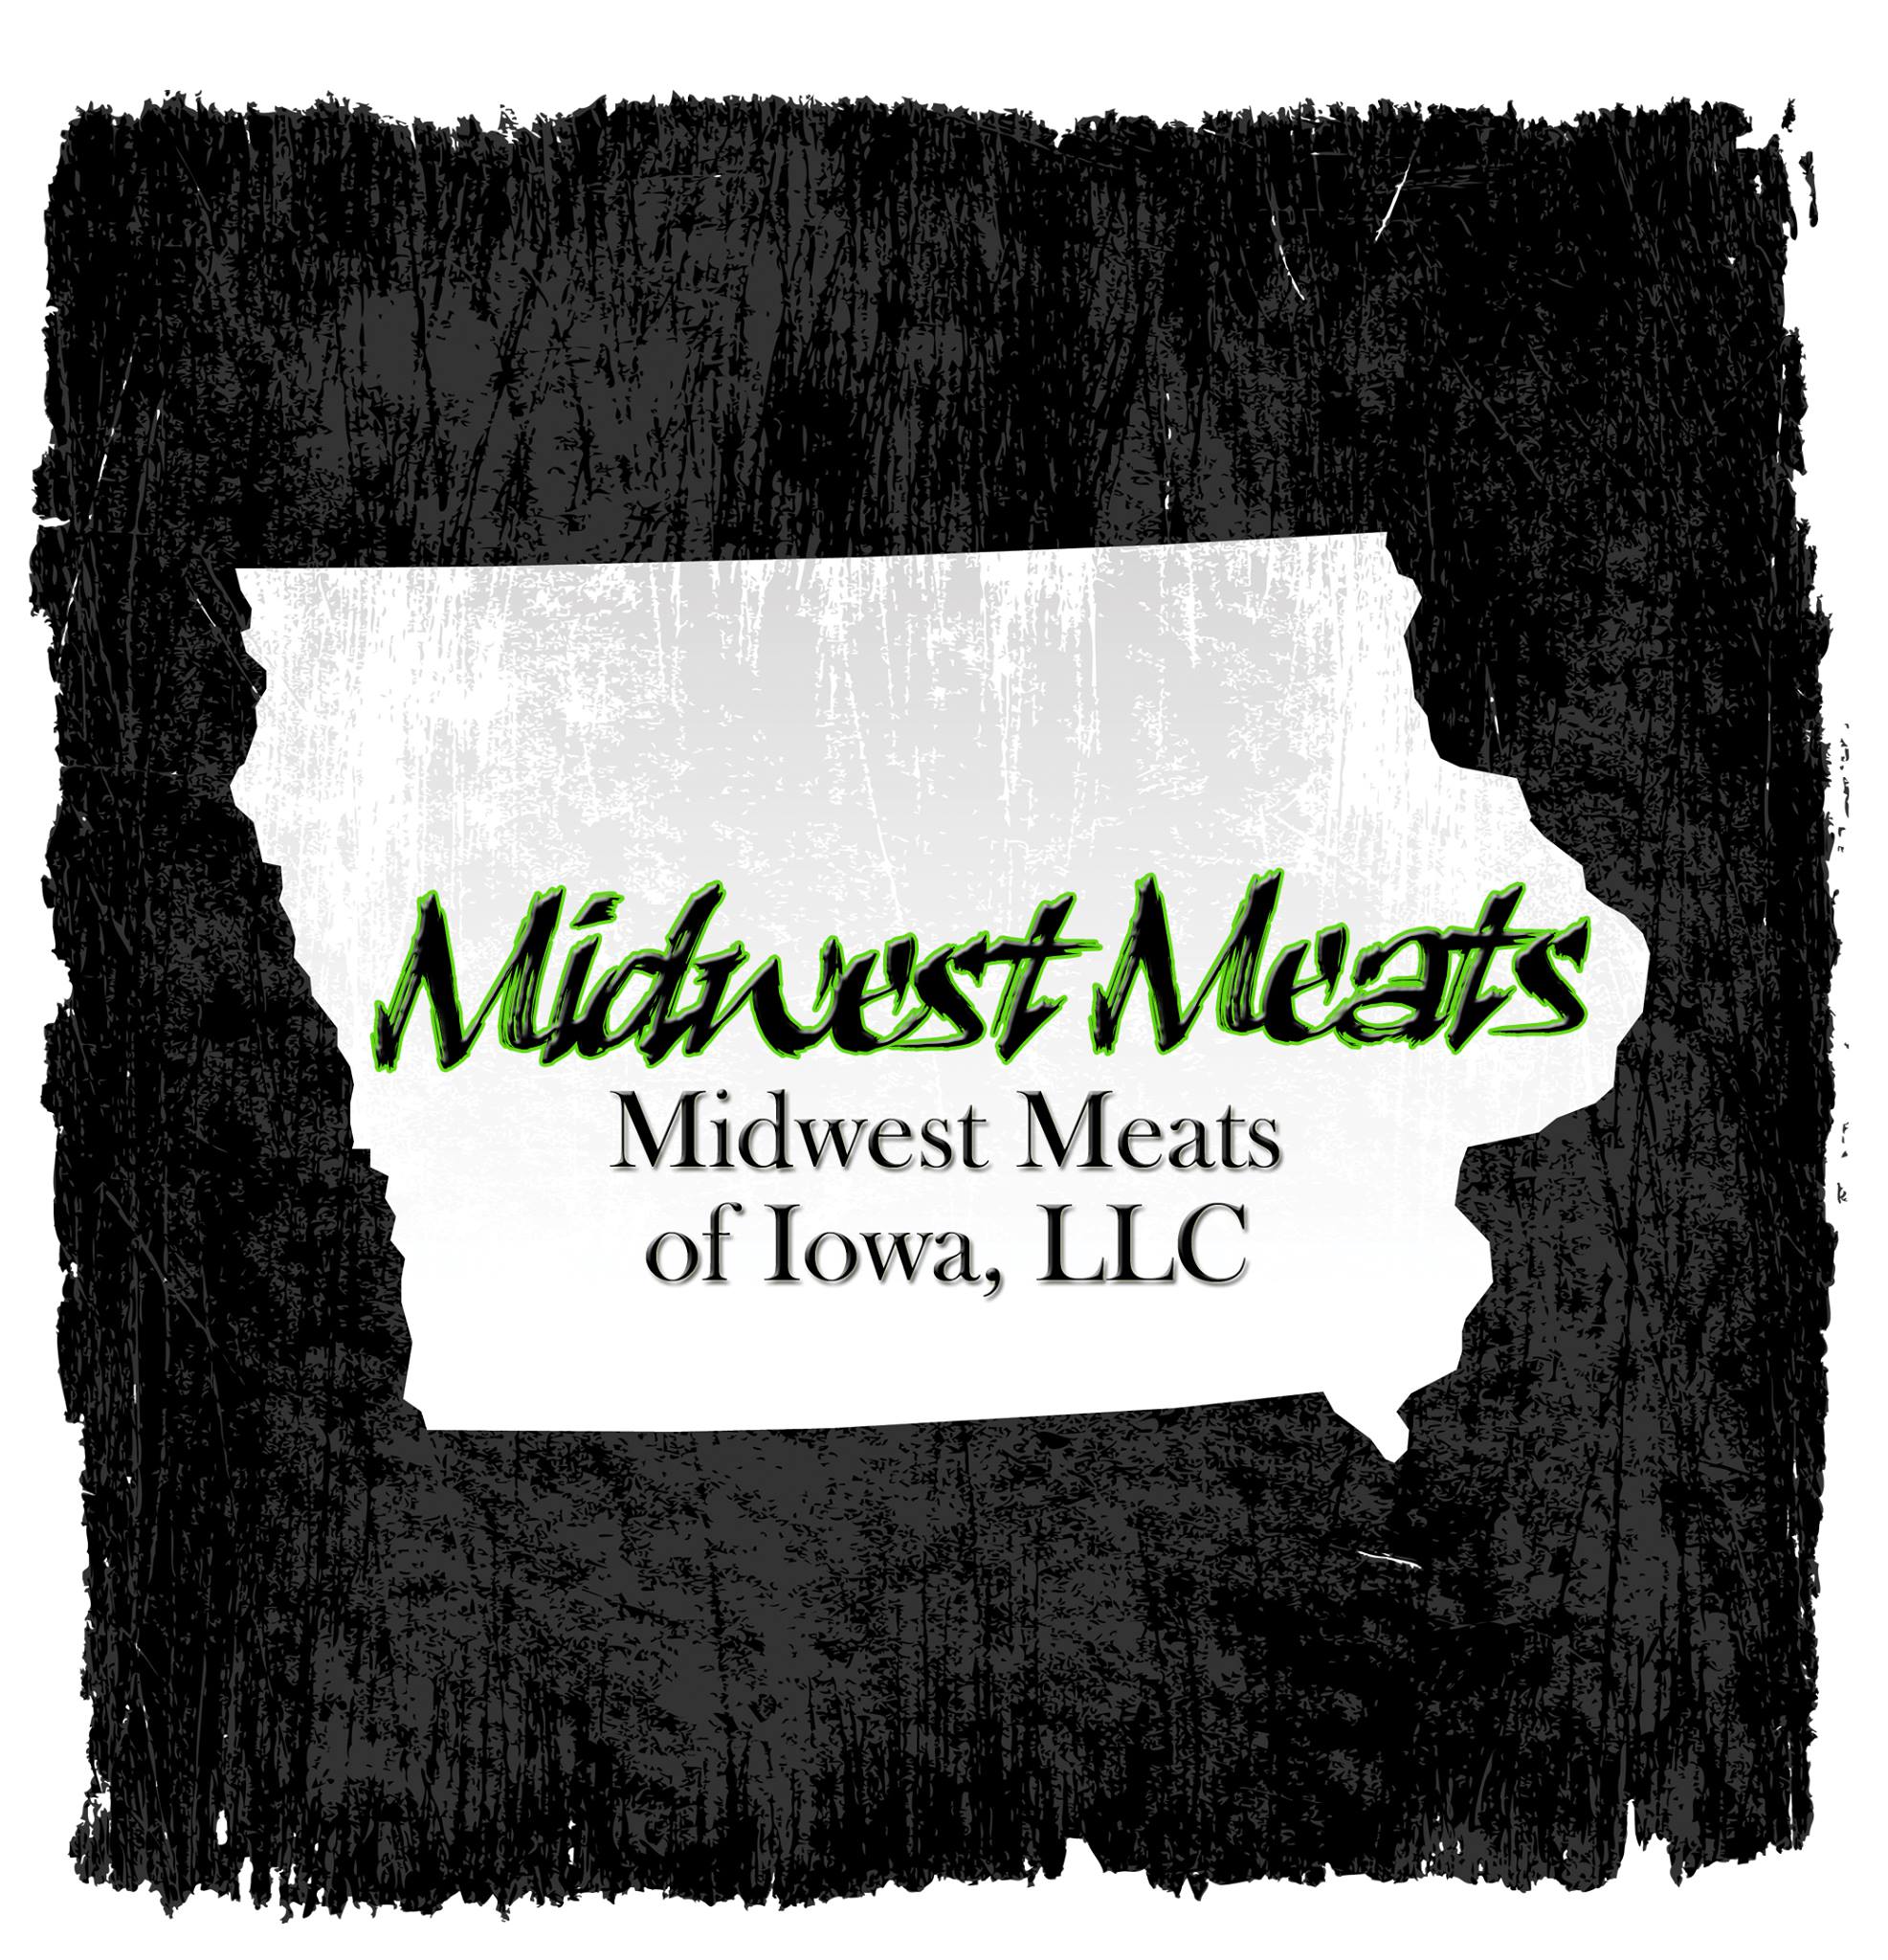 Midwest Meats of Iowa